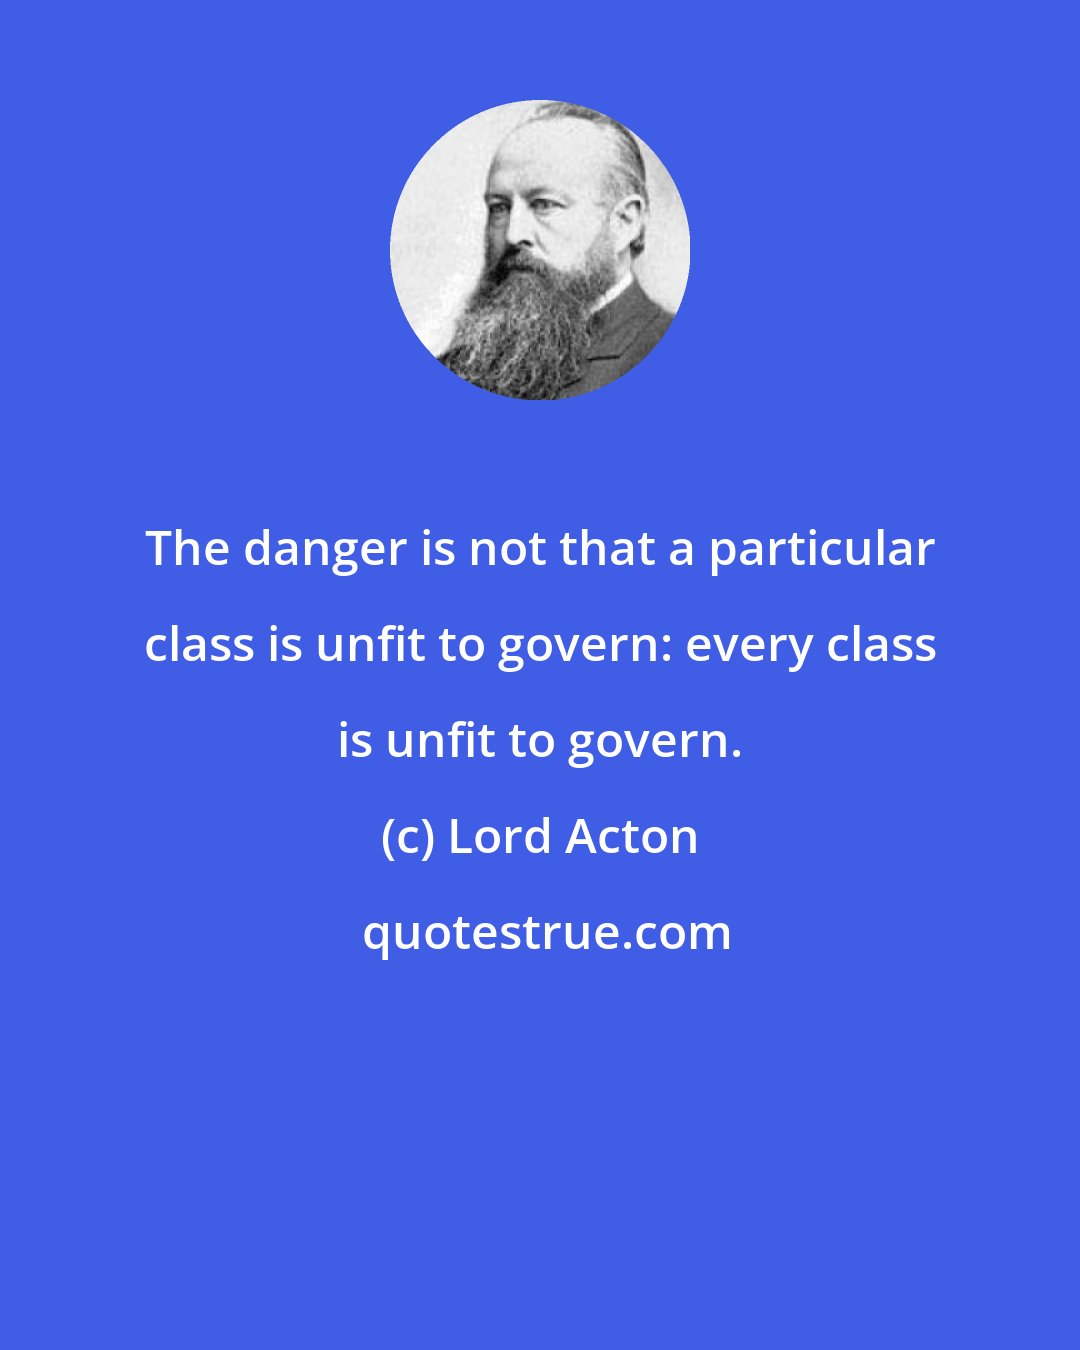 Lord Acton: The danger is not that a particular class is unfit to govern: every class is unfit to govern.